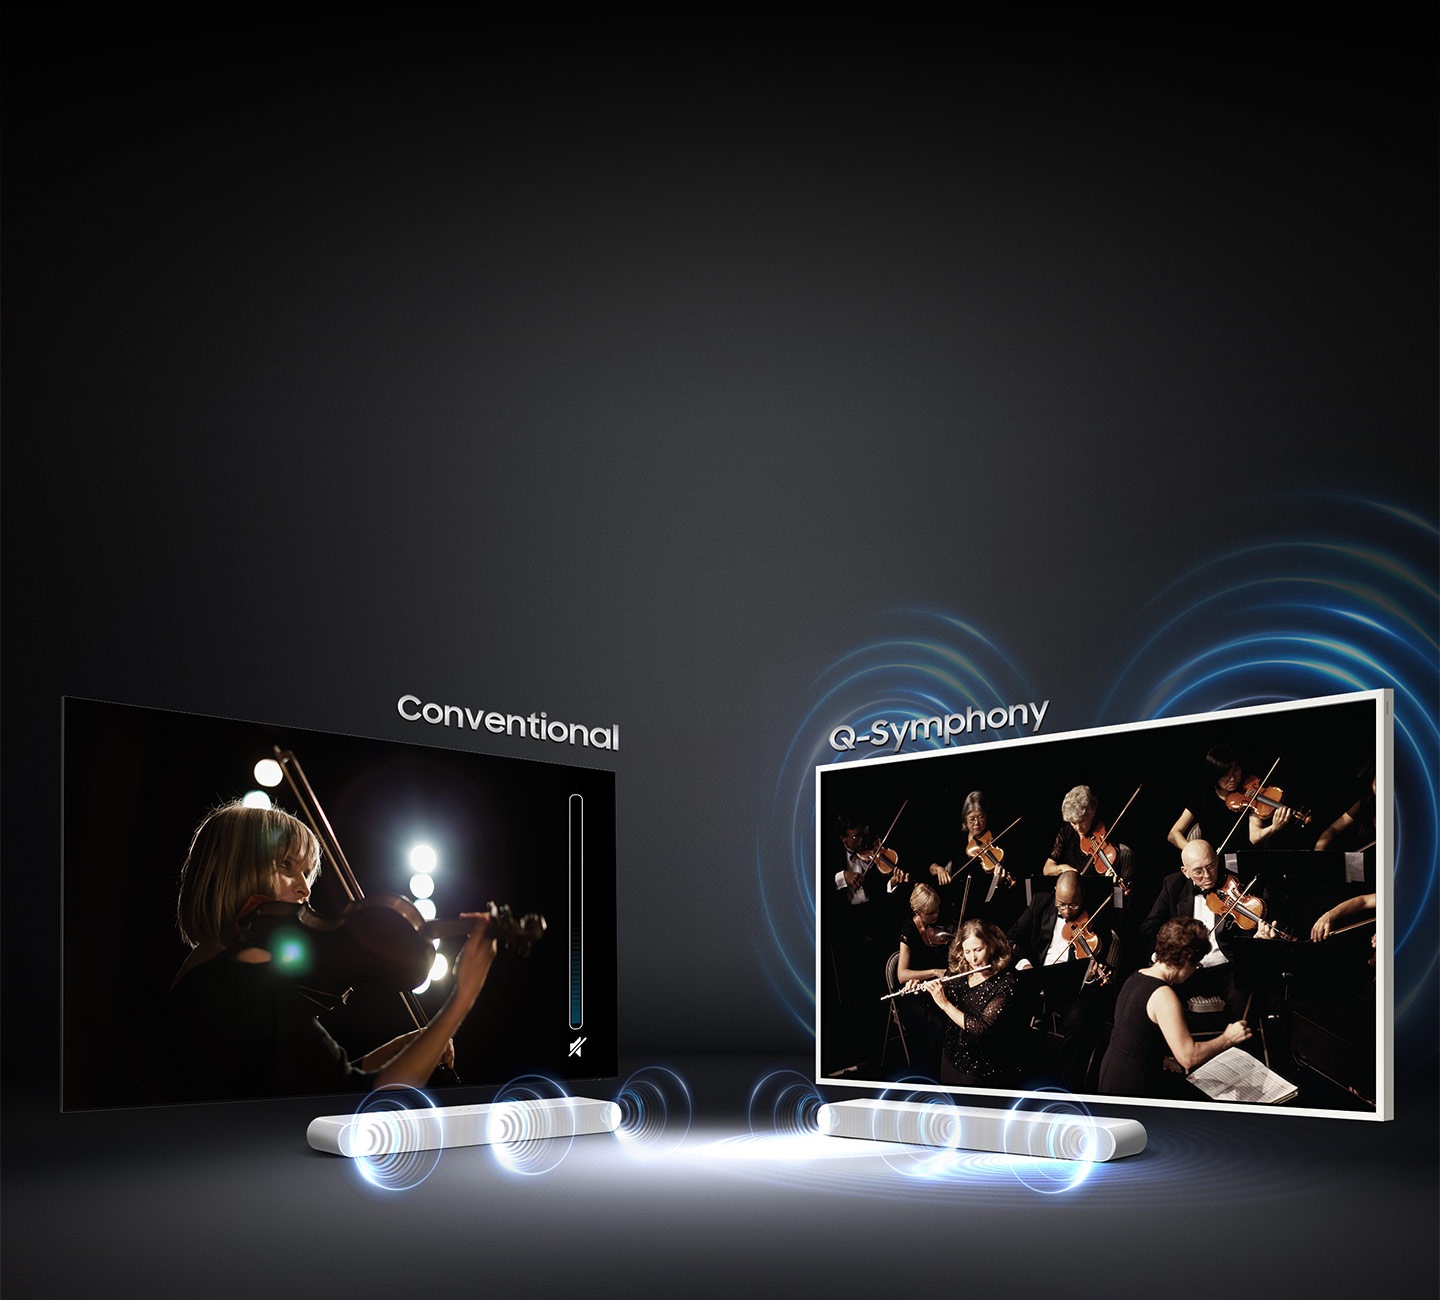 Sound wave graphics from only soundbar demonstrate conventional sound experience.On the other hand, sound wave graphics from TV speaker and soundbar show that Q Symphony allows sound to be heard simultaneously from TV speaker and soundbar.